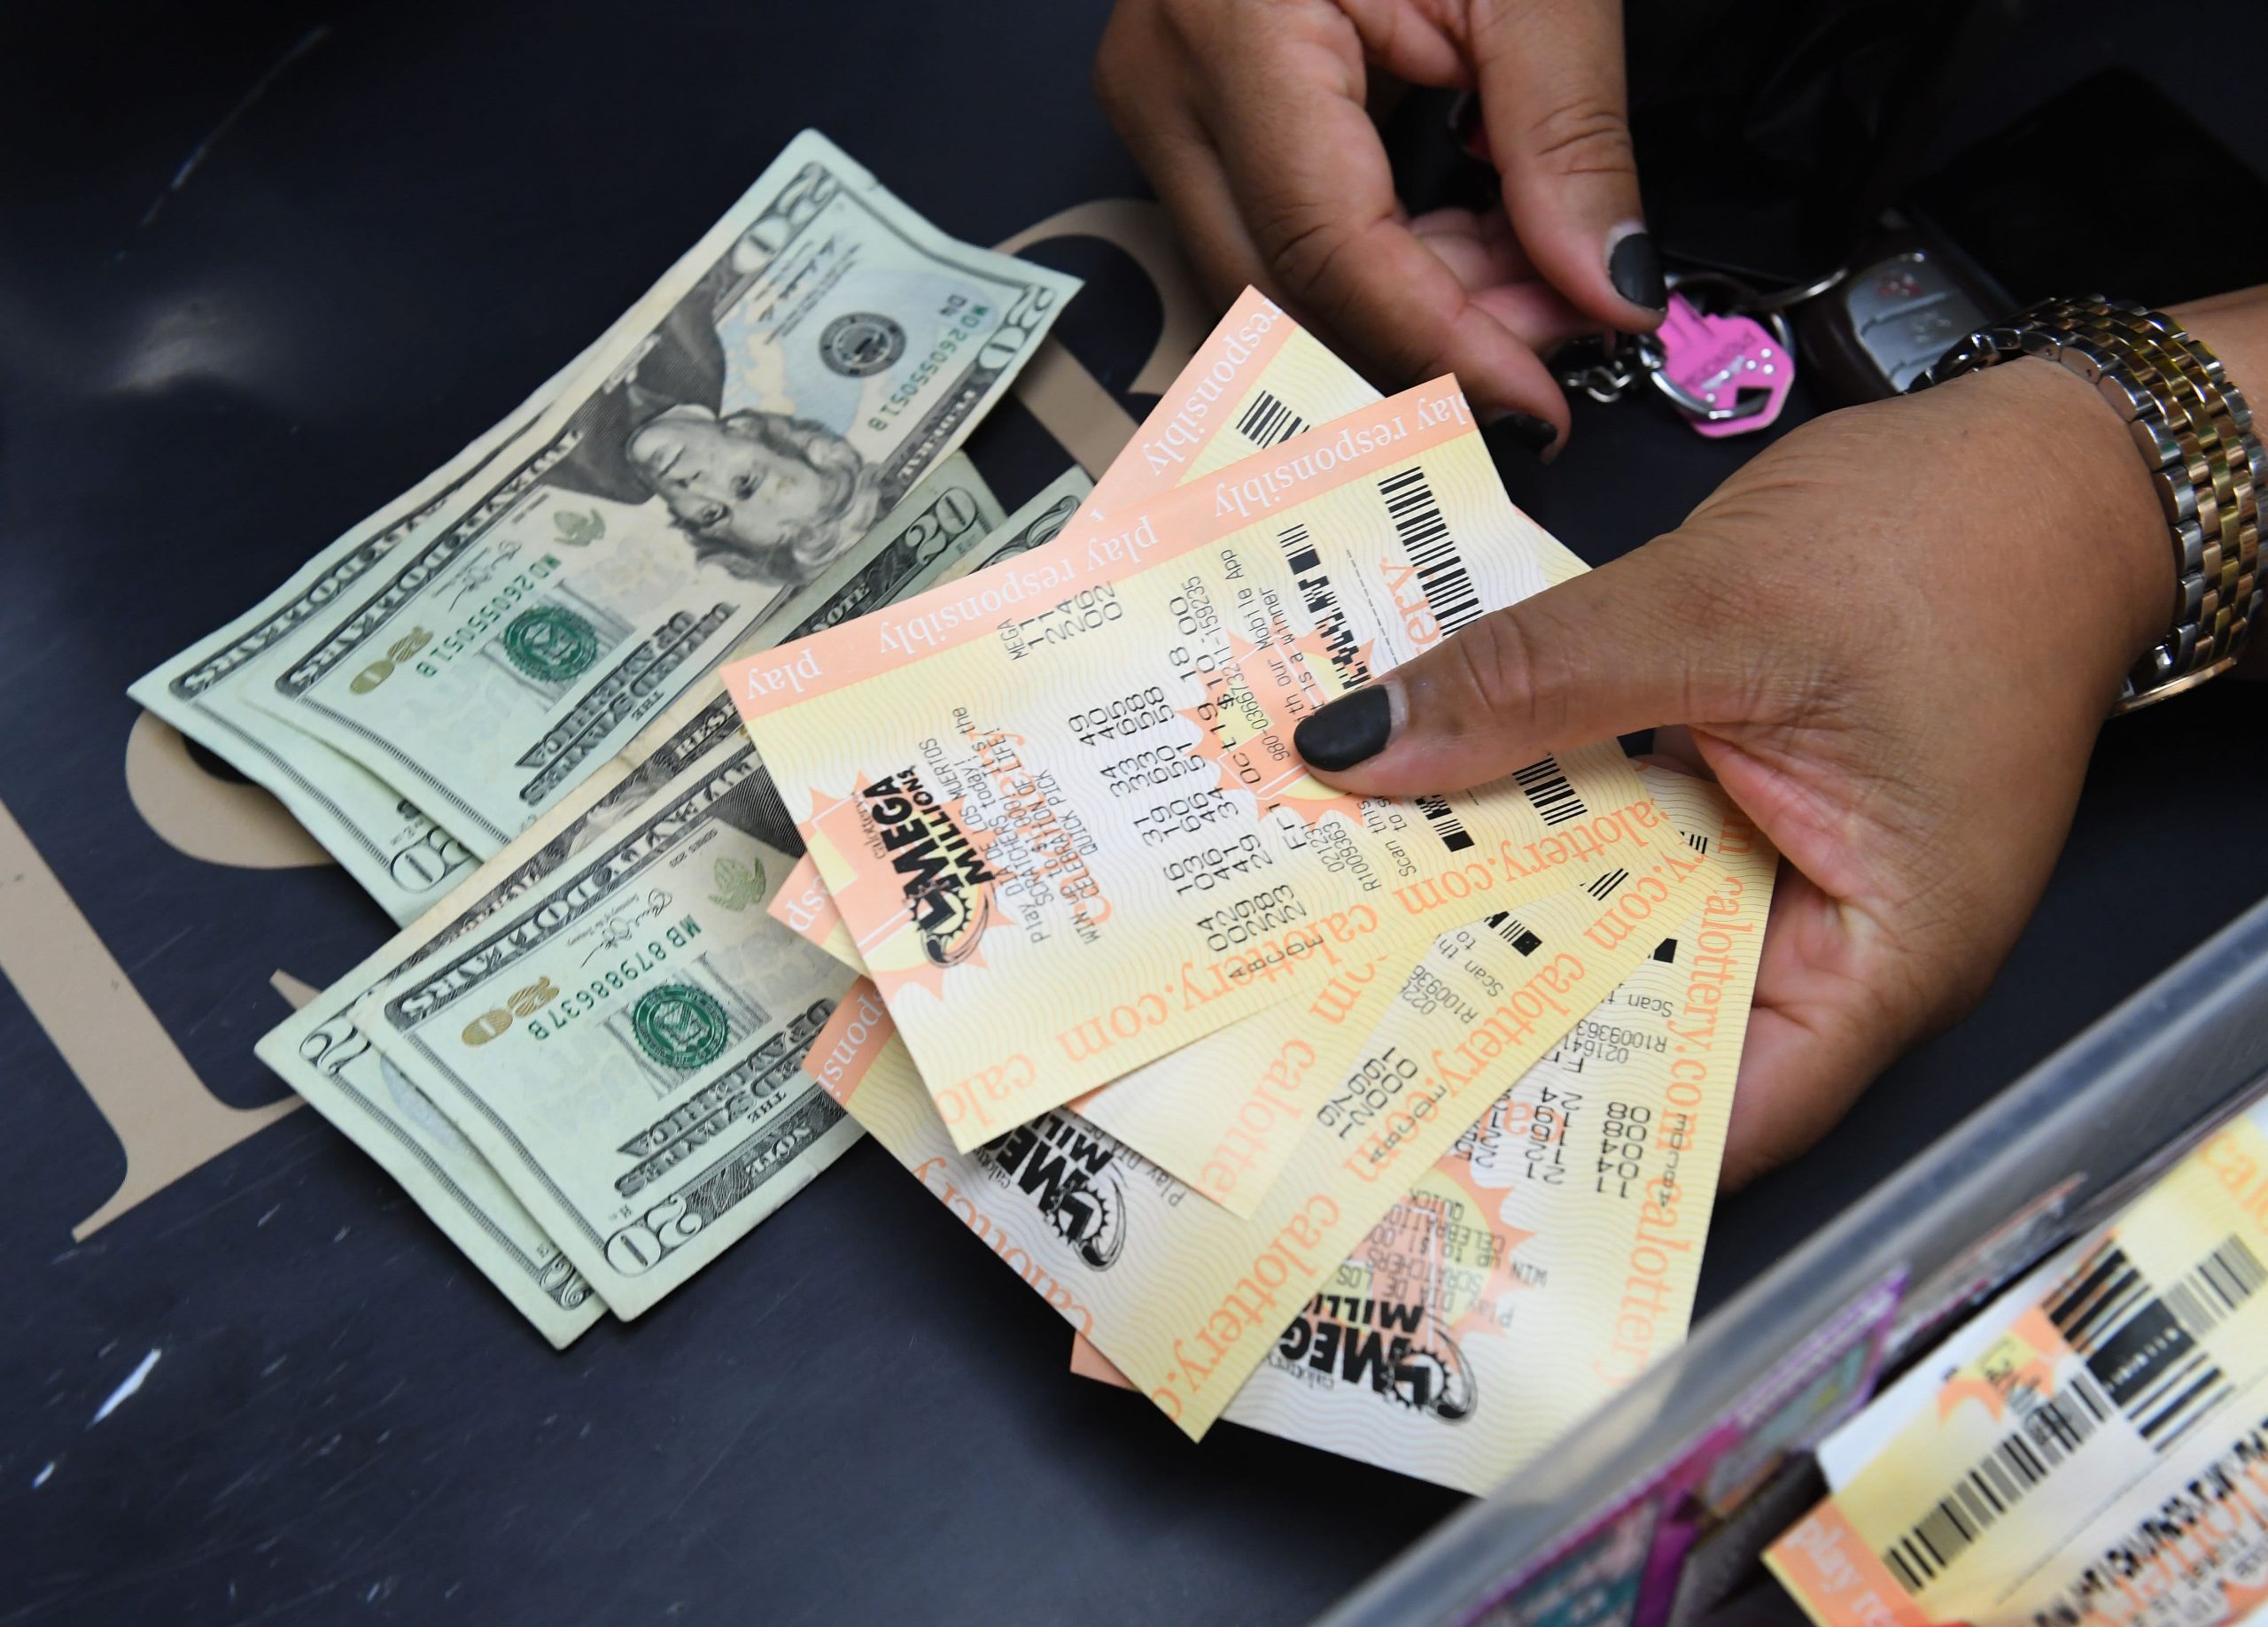 The $1 billion Mega Millions jackpot has a winner. Here are tips for handling the windfall